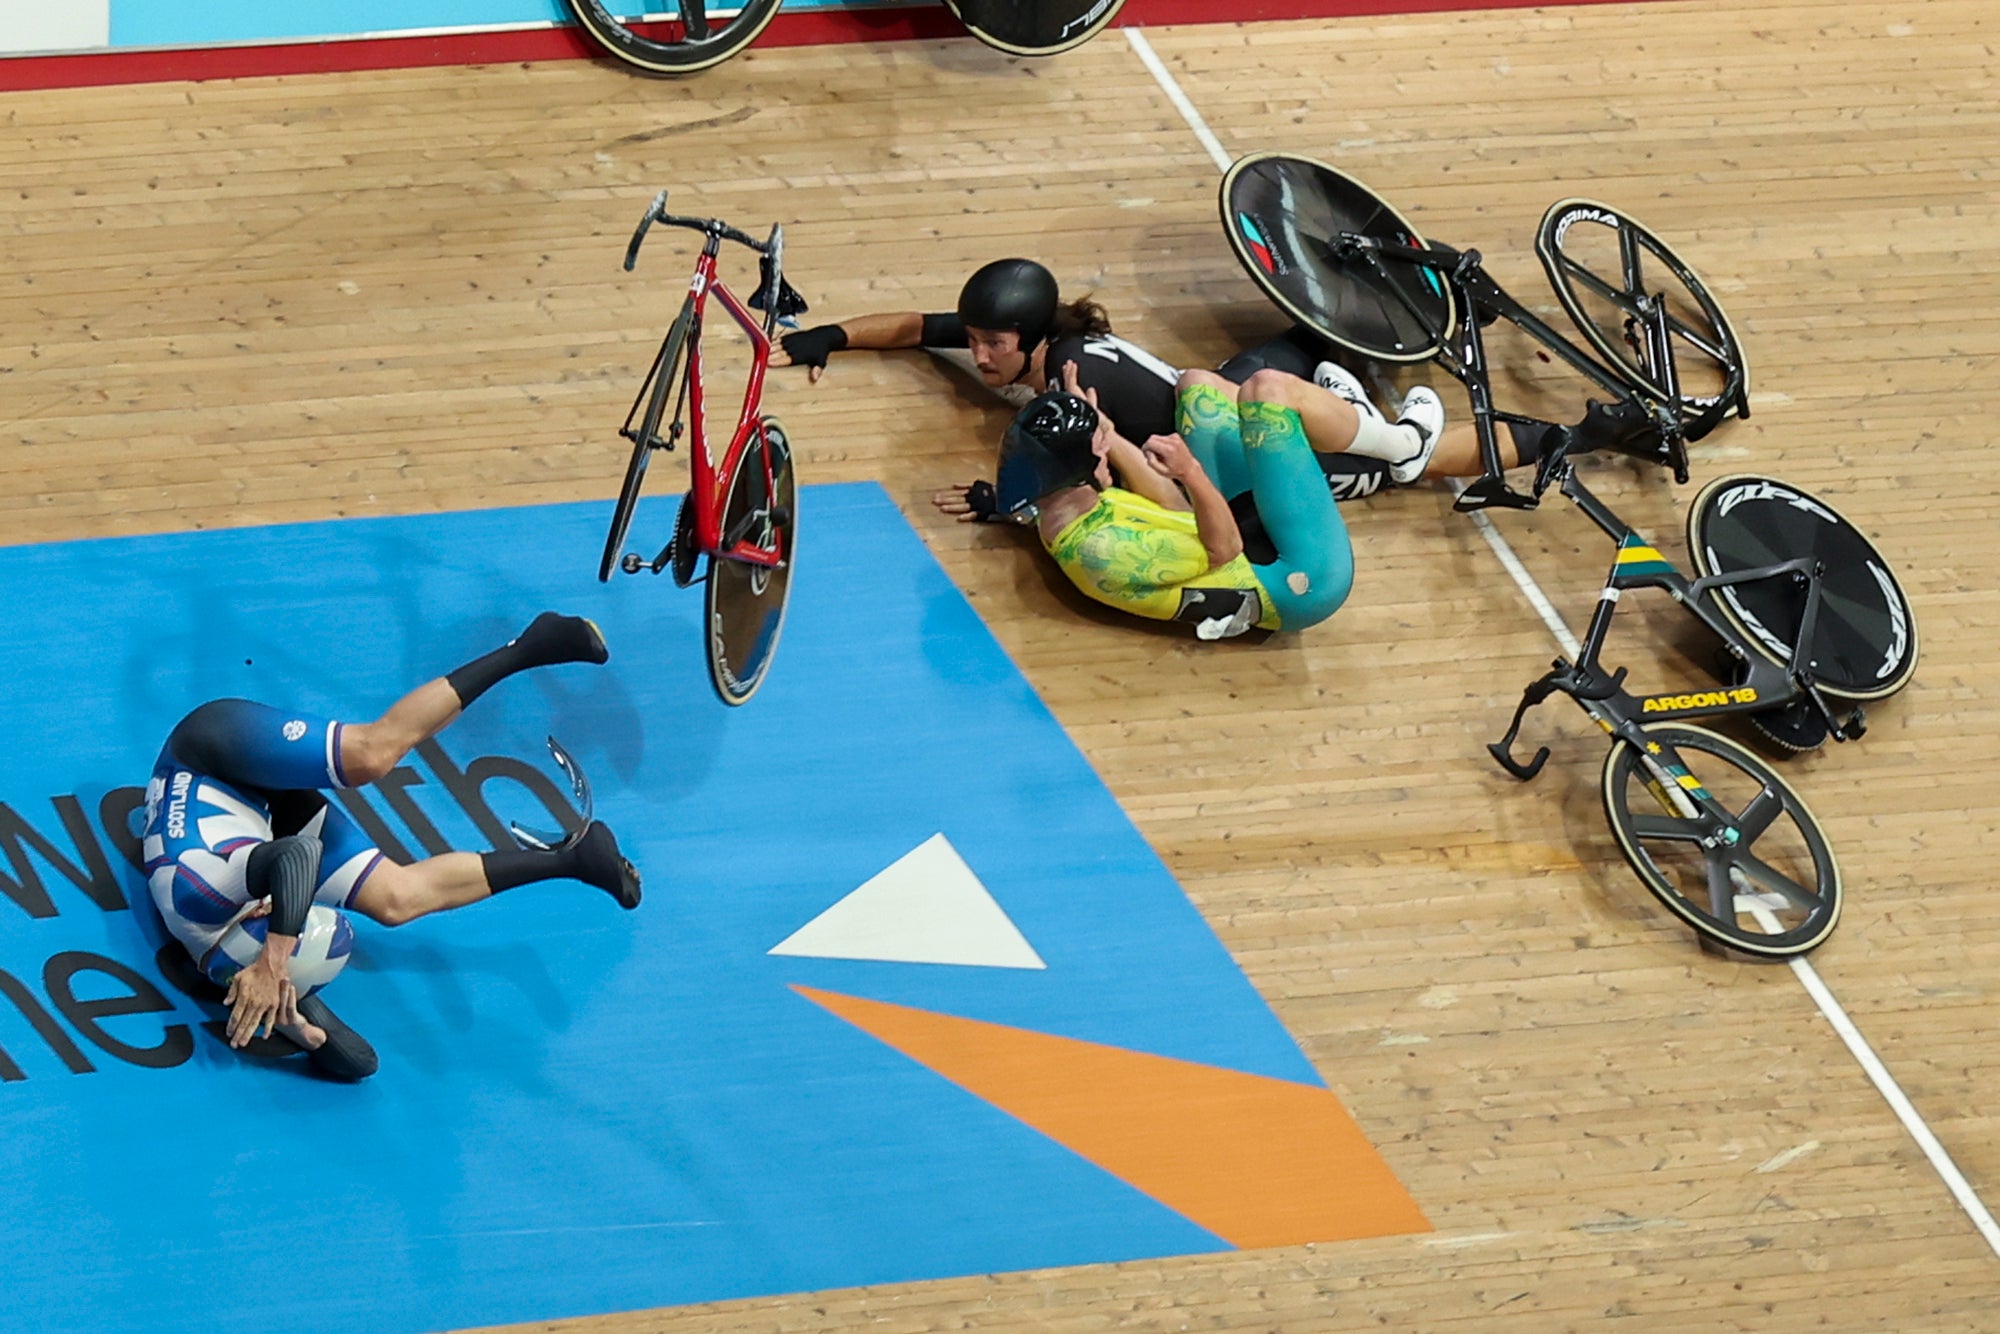 Riders crash on the final lap in the men's 15km scratch race qualifying